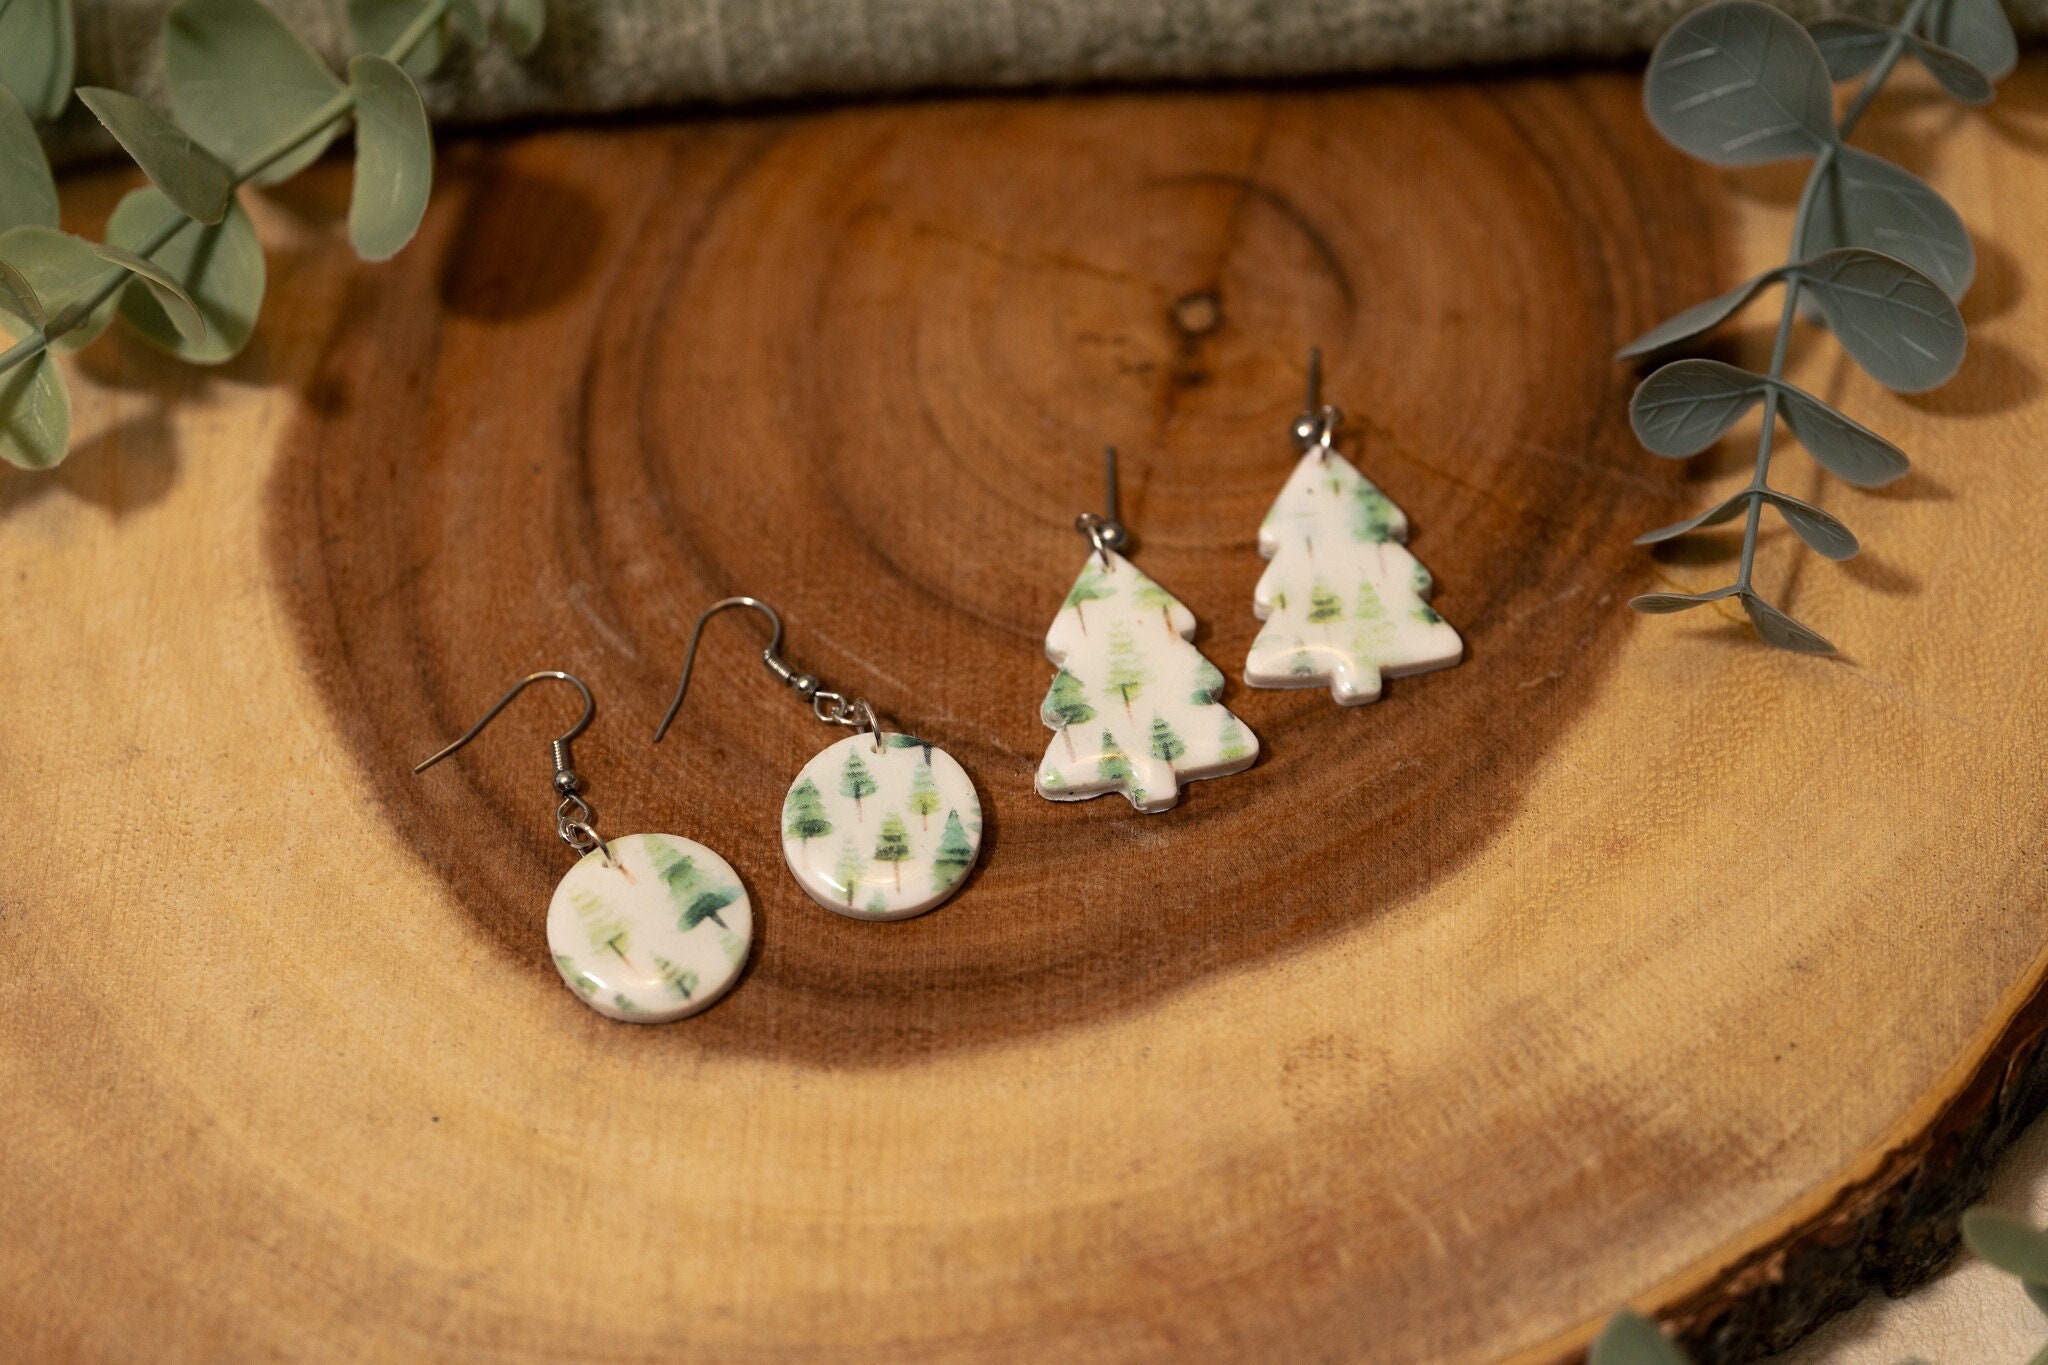 White & Green Festive Christmas Tree Print Earrings | Polymer Clay New Year Party Handmade